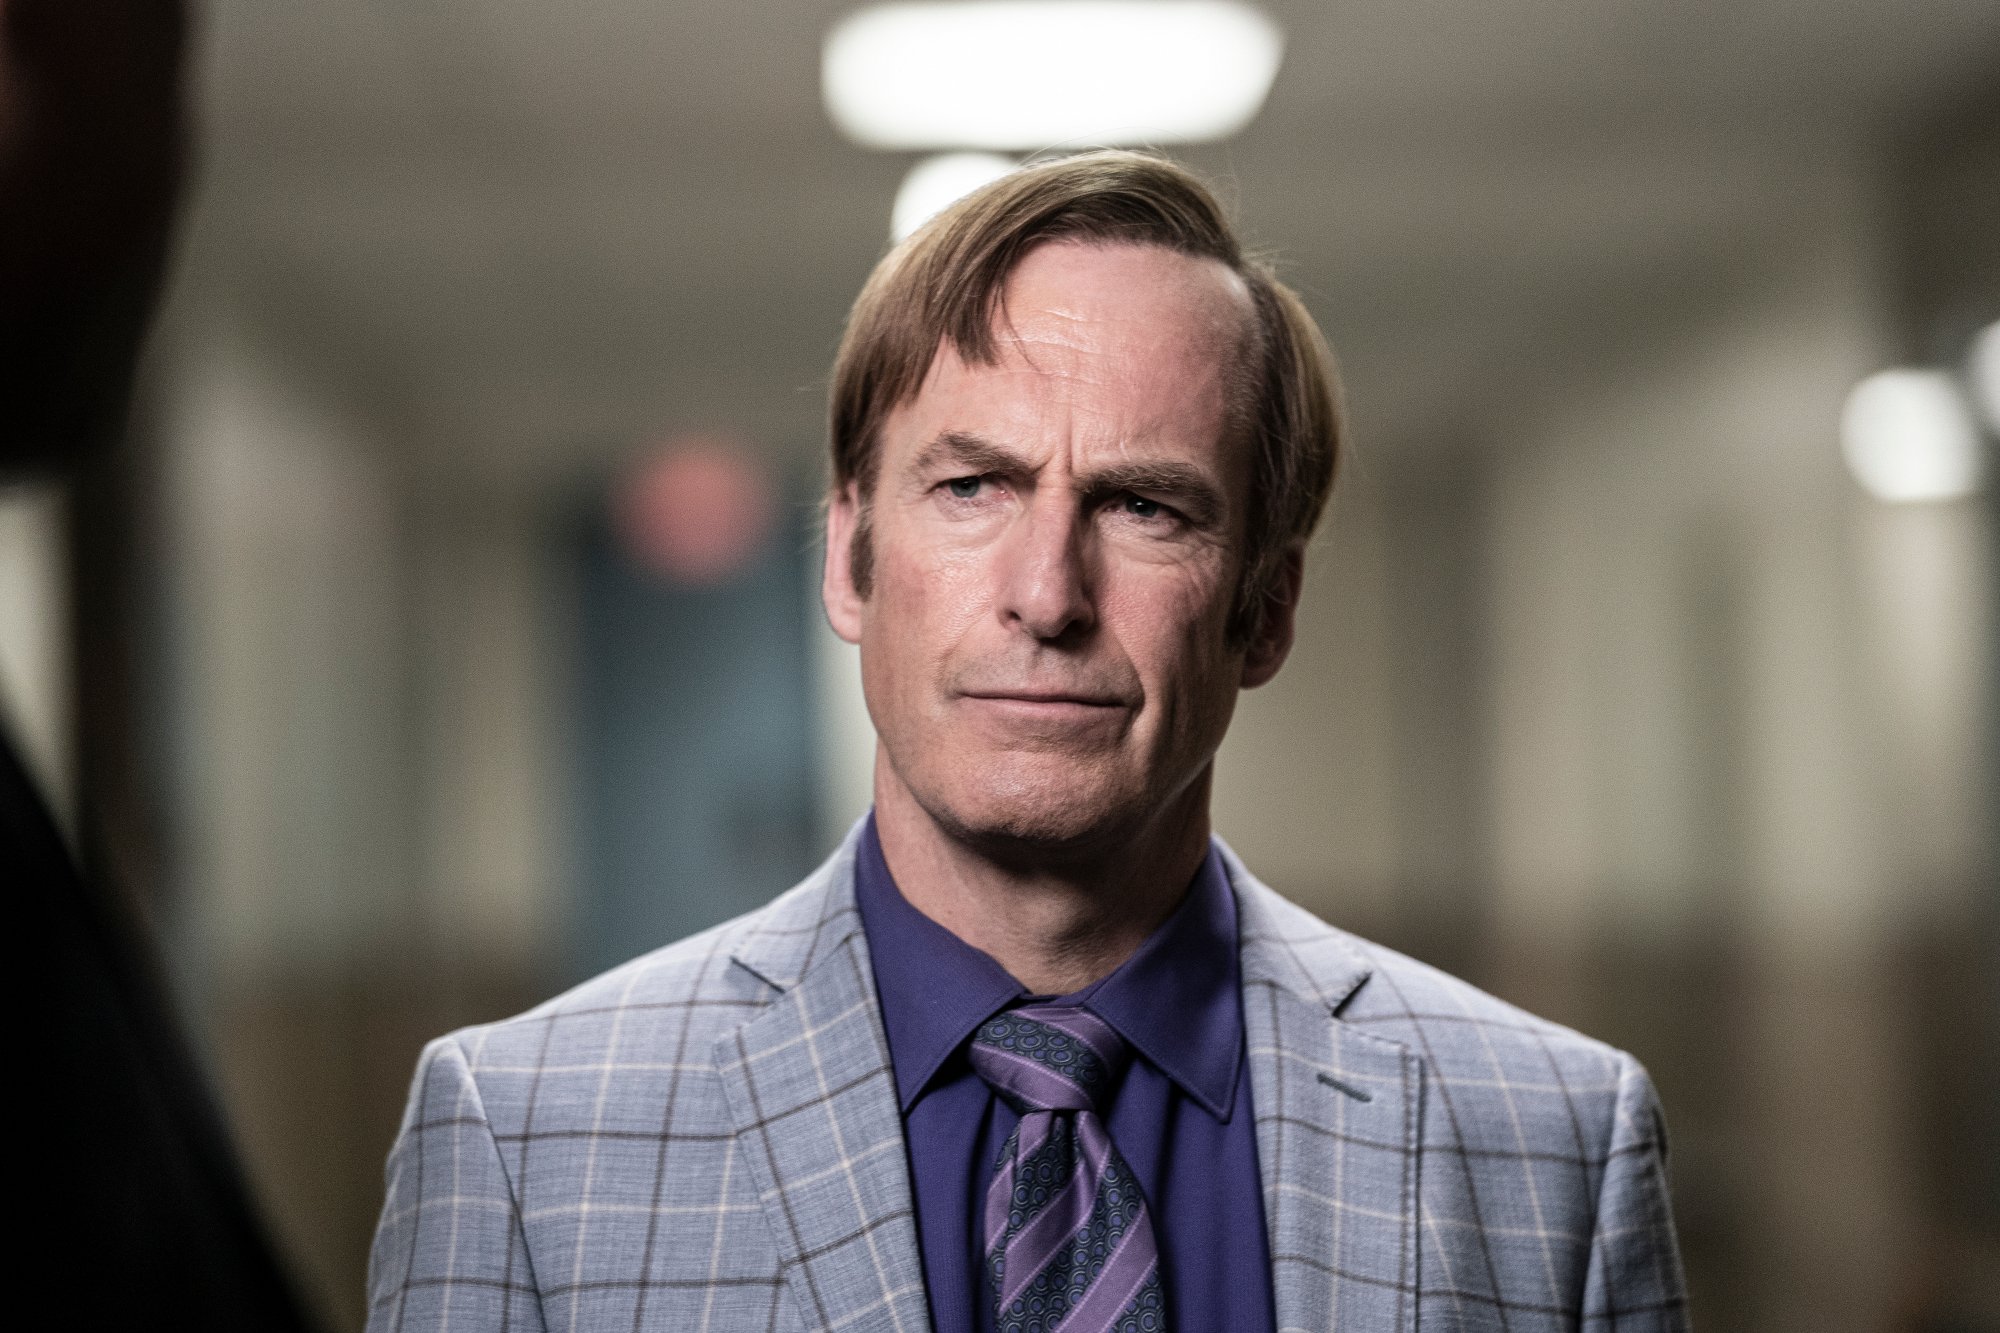 Bob Odenkirk as Saul Goodman in 'Better Call Saul' Season 6 for our article about when the premiere will air tonight. The image shows him wearing a blue shirt and gray suit and wearing a perplexed expression.